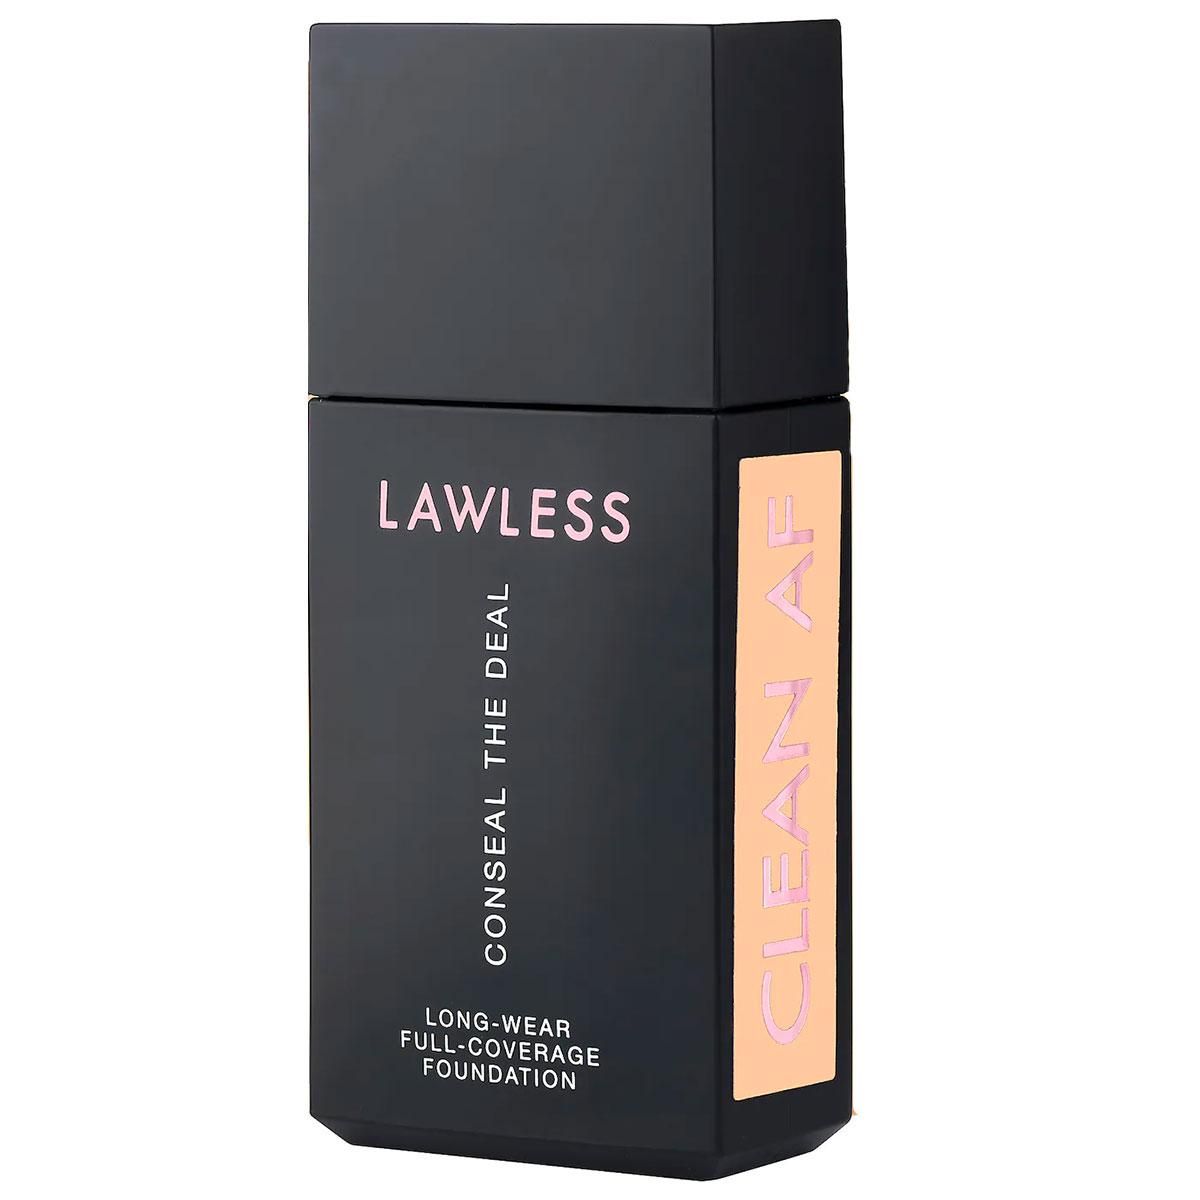 lawless conseal the deal long wear full coverage foundation